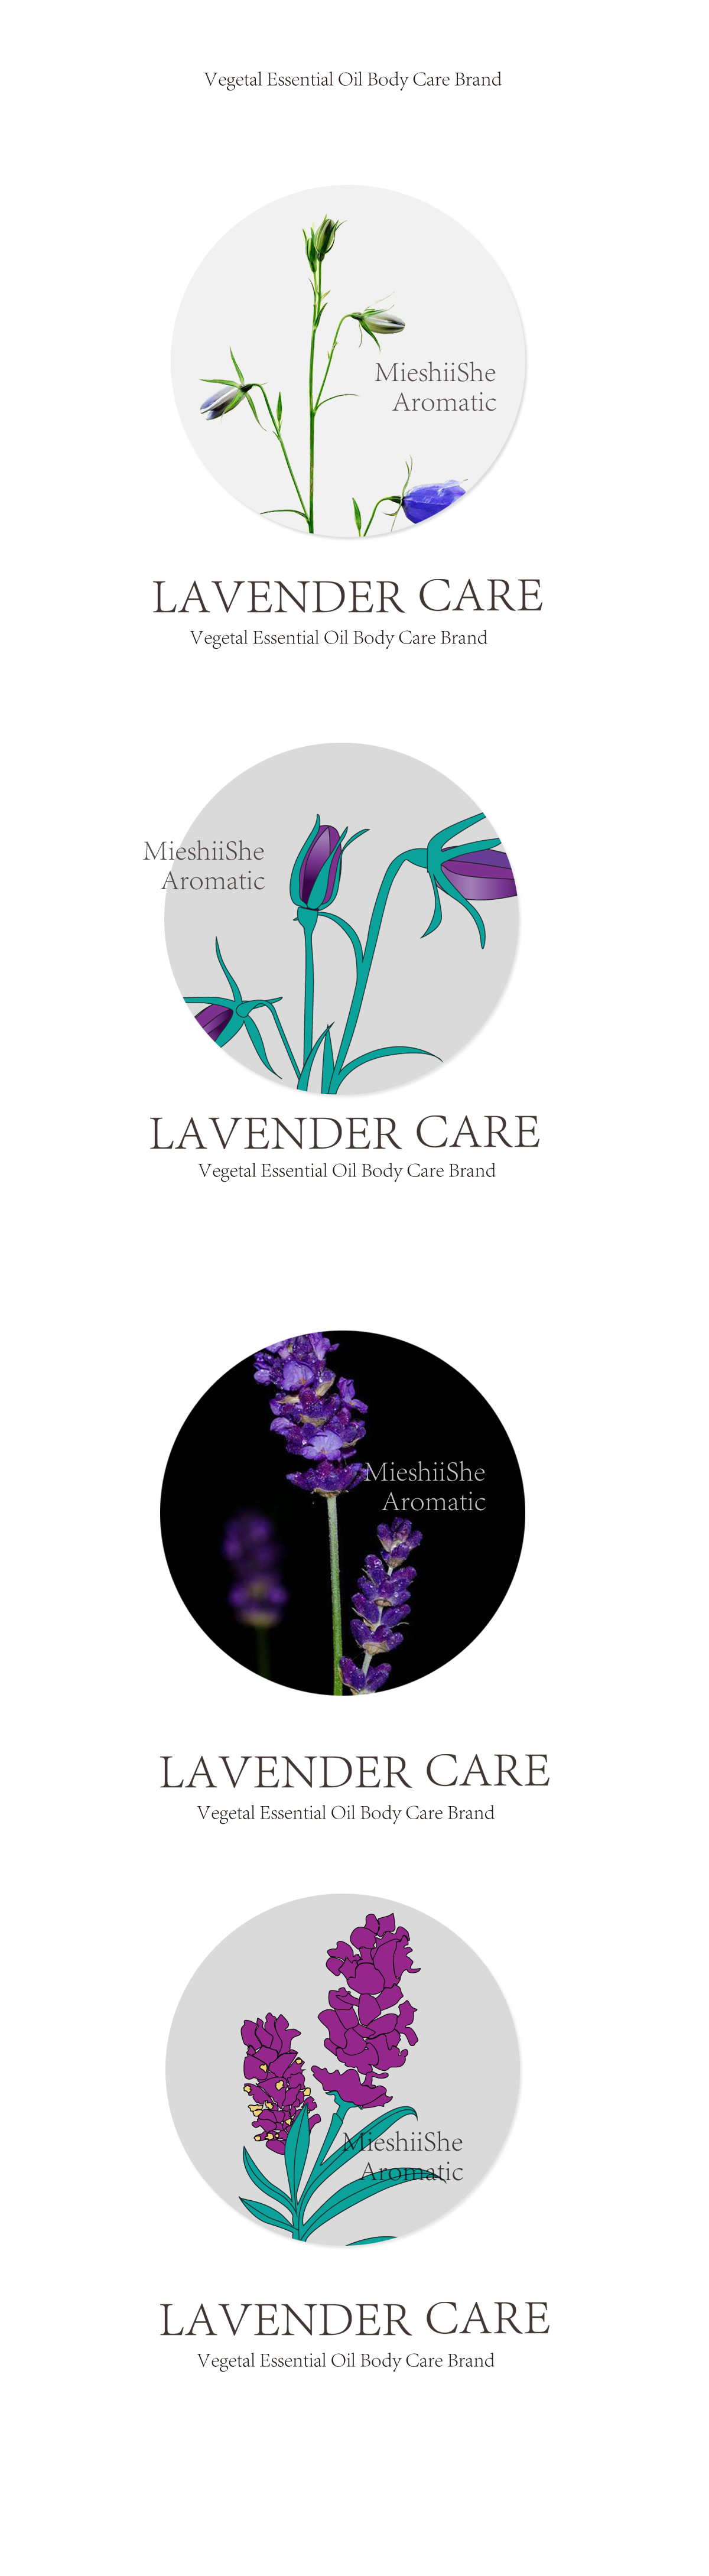 Lavender Body Care shampoo conditioner package